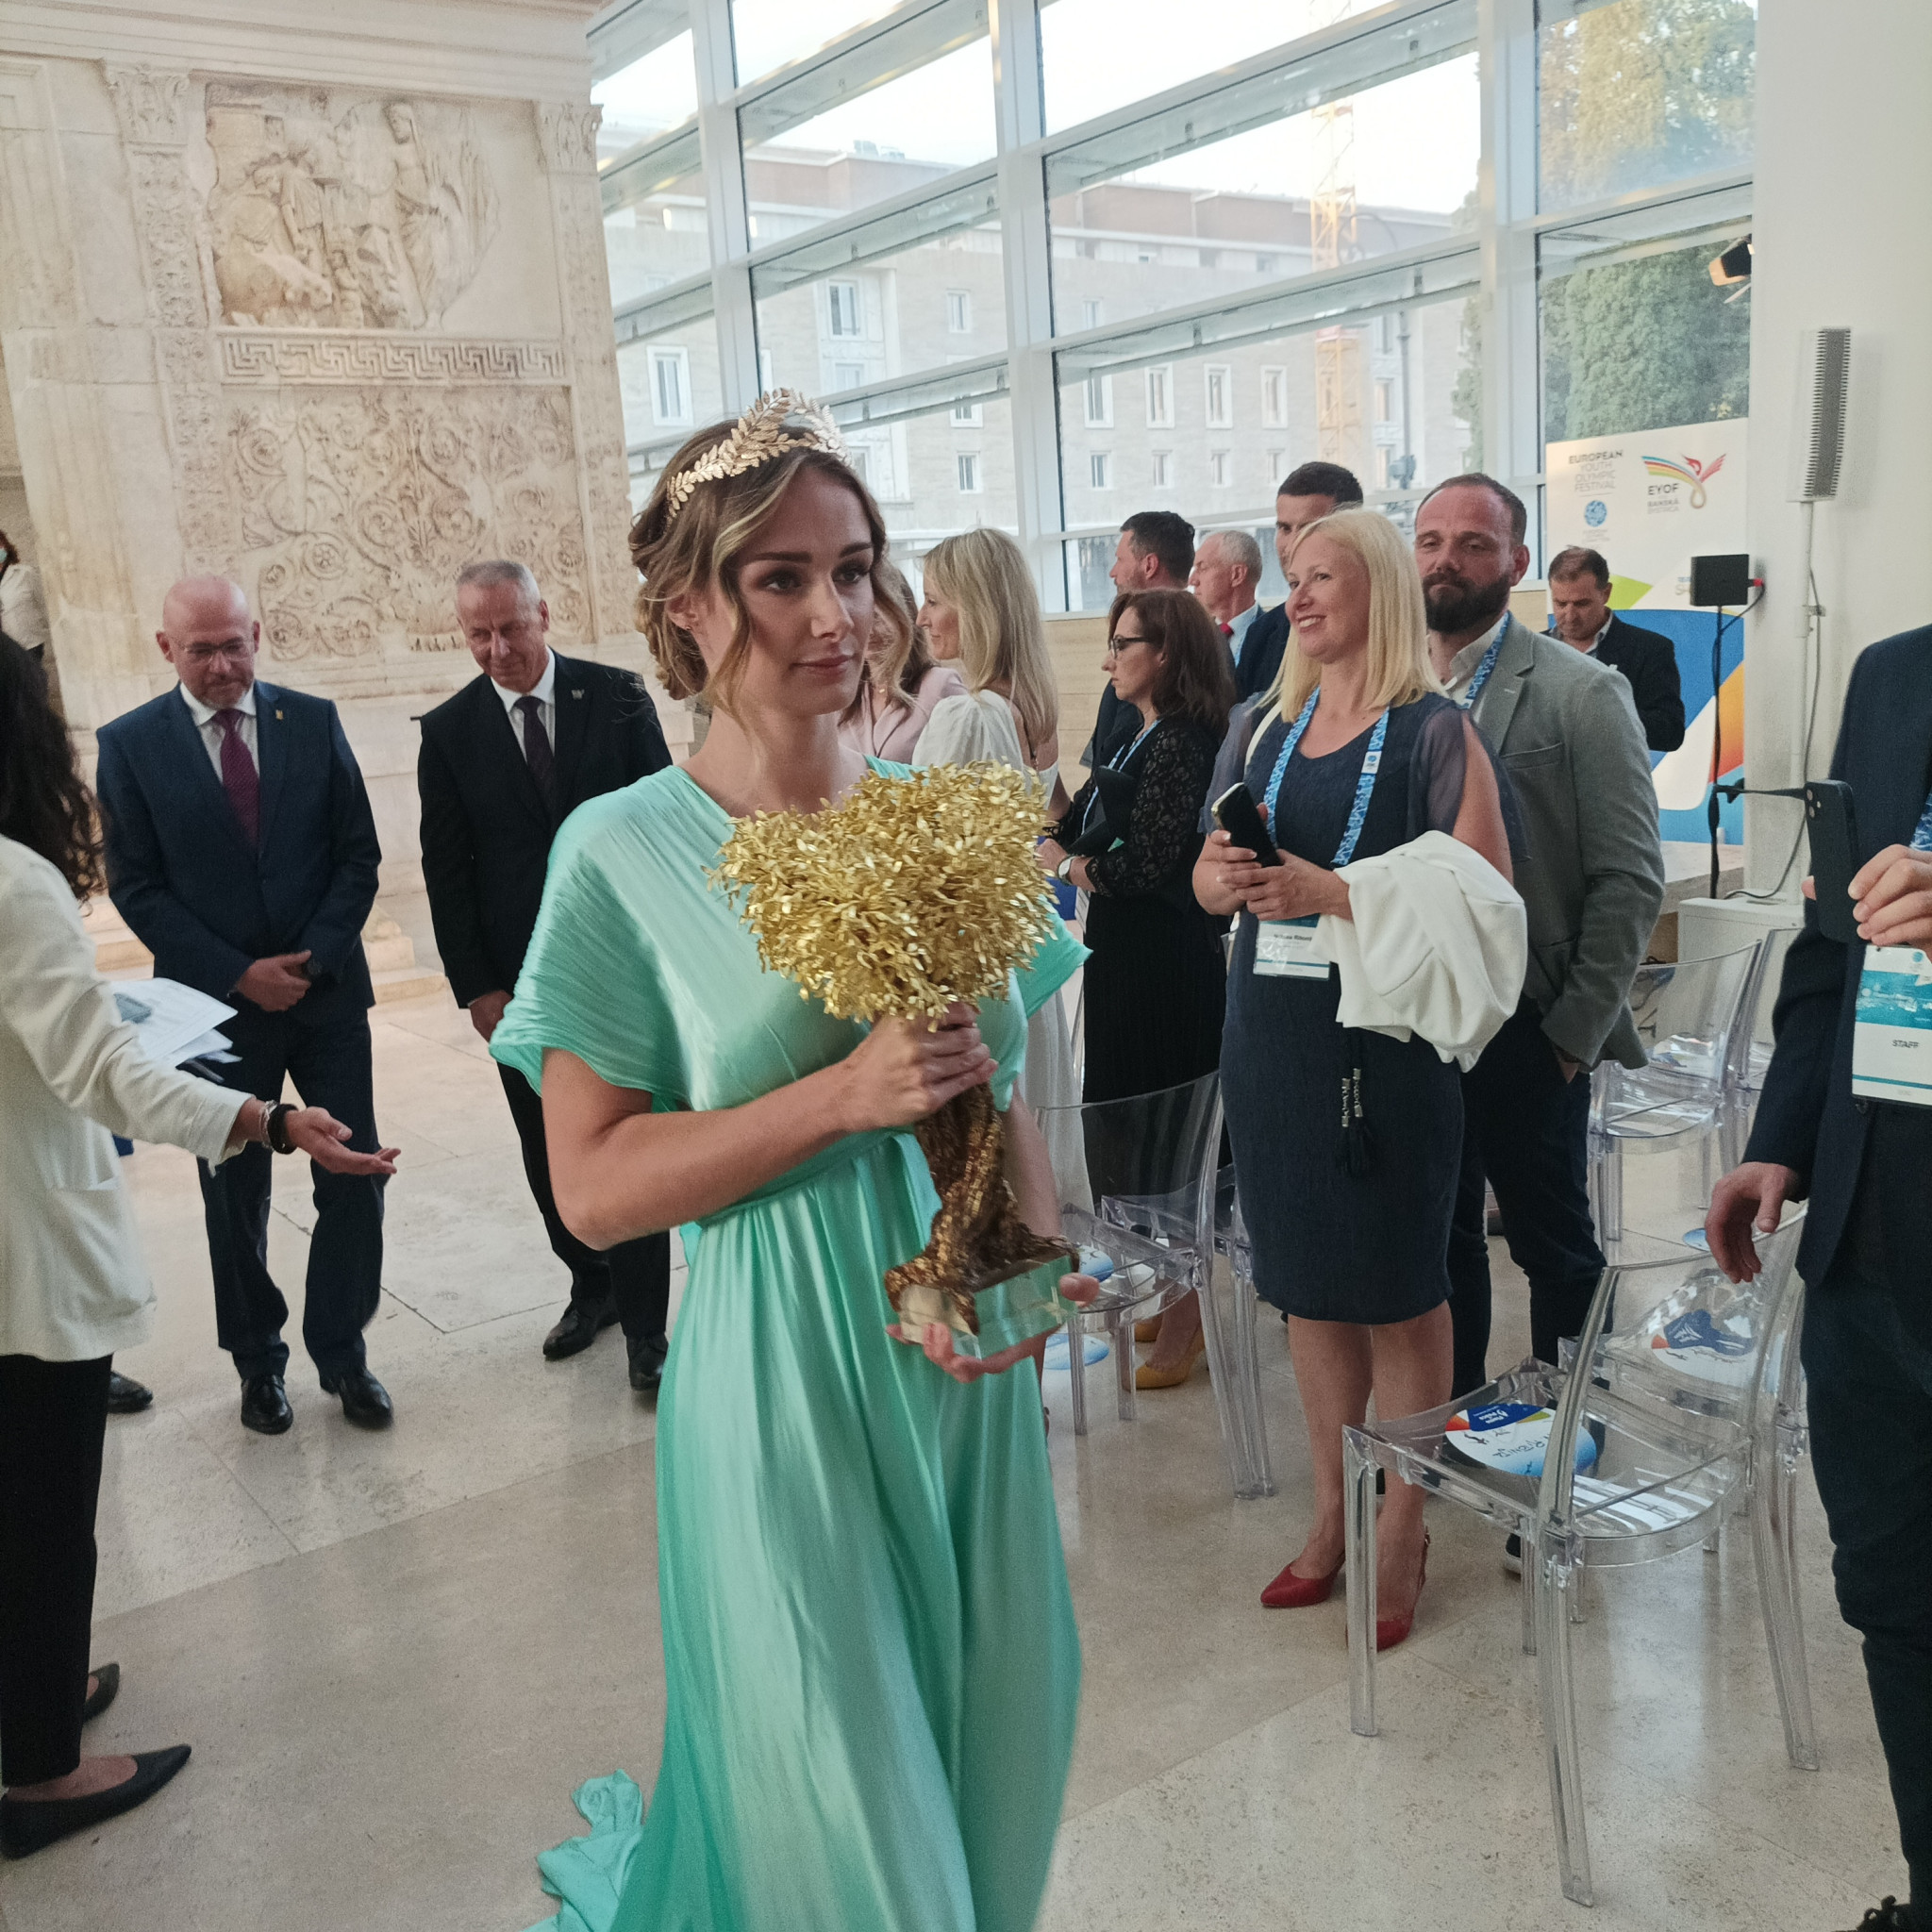 The golden olive tree, which will be handed on to successive EYOF host cities, is carried through the venue ©ITG